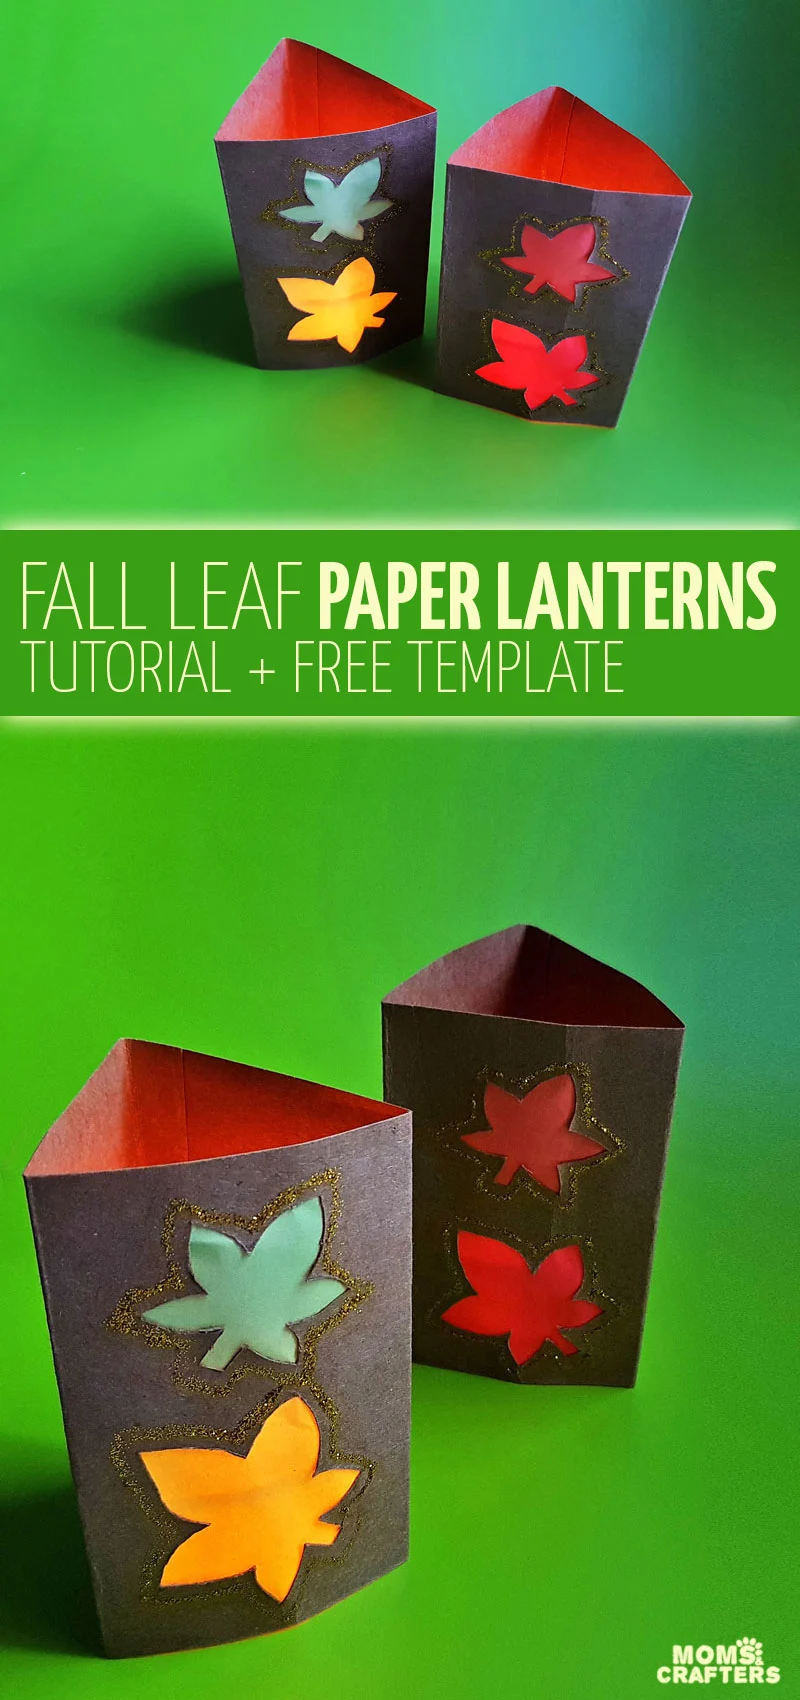 Click for a free printable template to make DIY fall luminaries and autumn paper lanterns! This paper cutting tutorial and template for fall is so easy and makes a great sukkah decoration and centerpiece too!